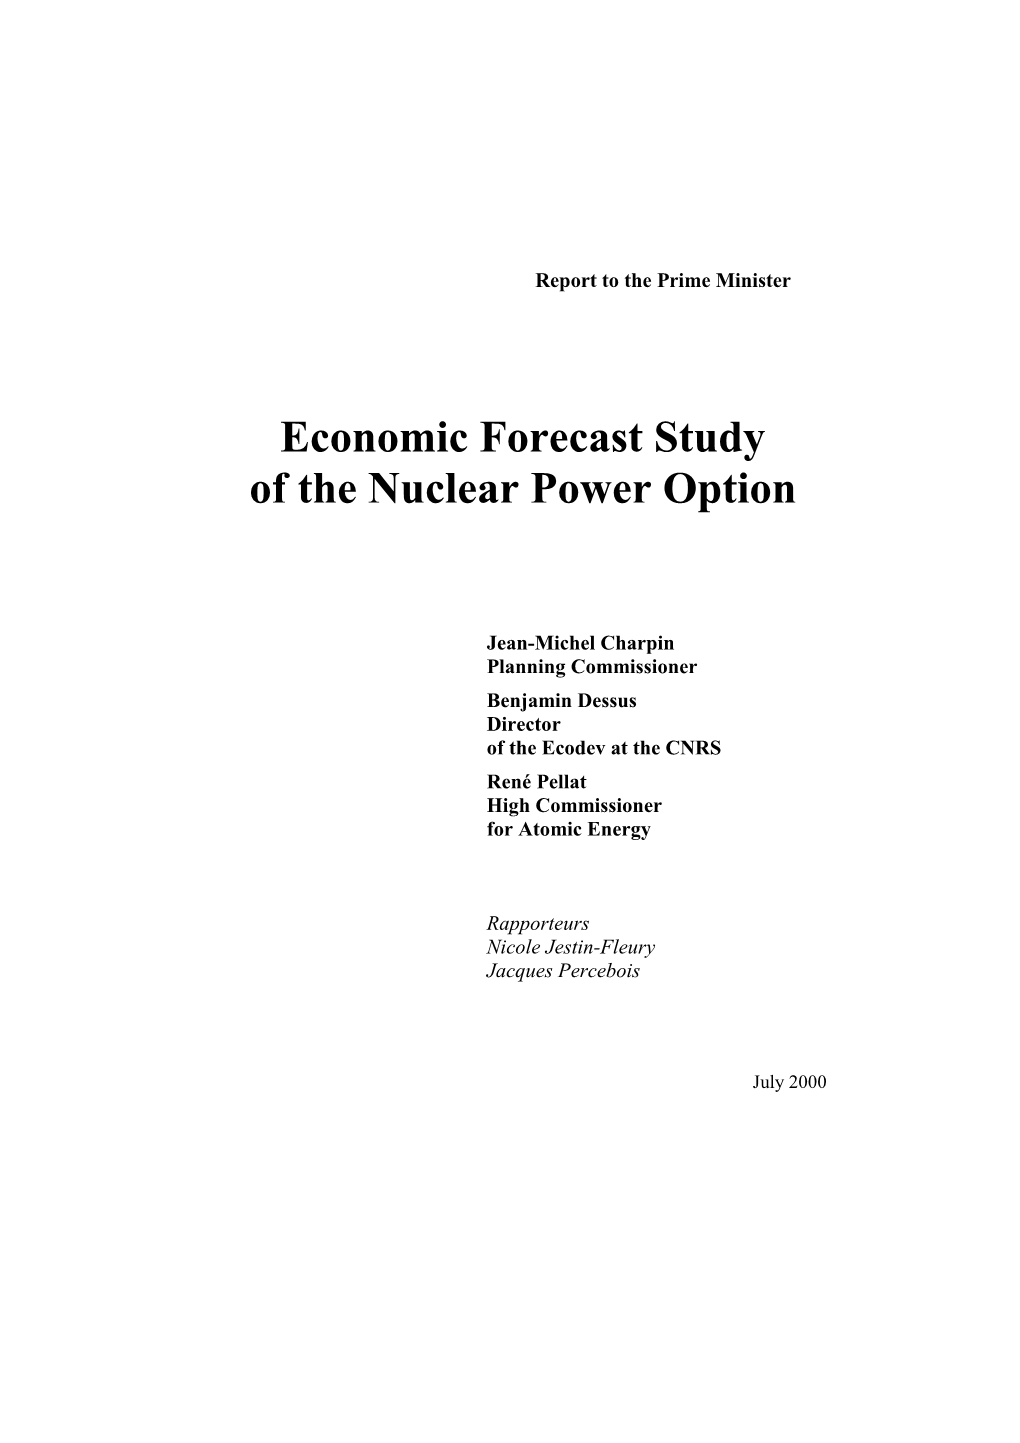 Economic Forecast Study of the Nuclear Power Option